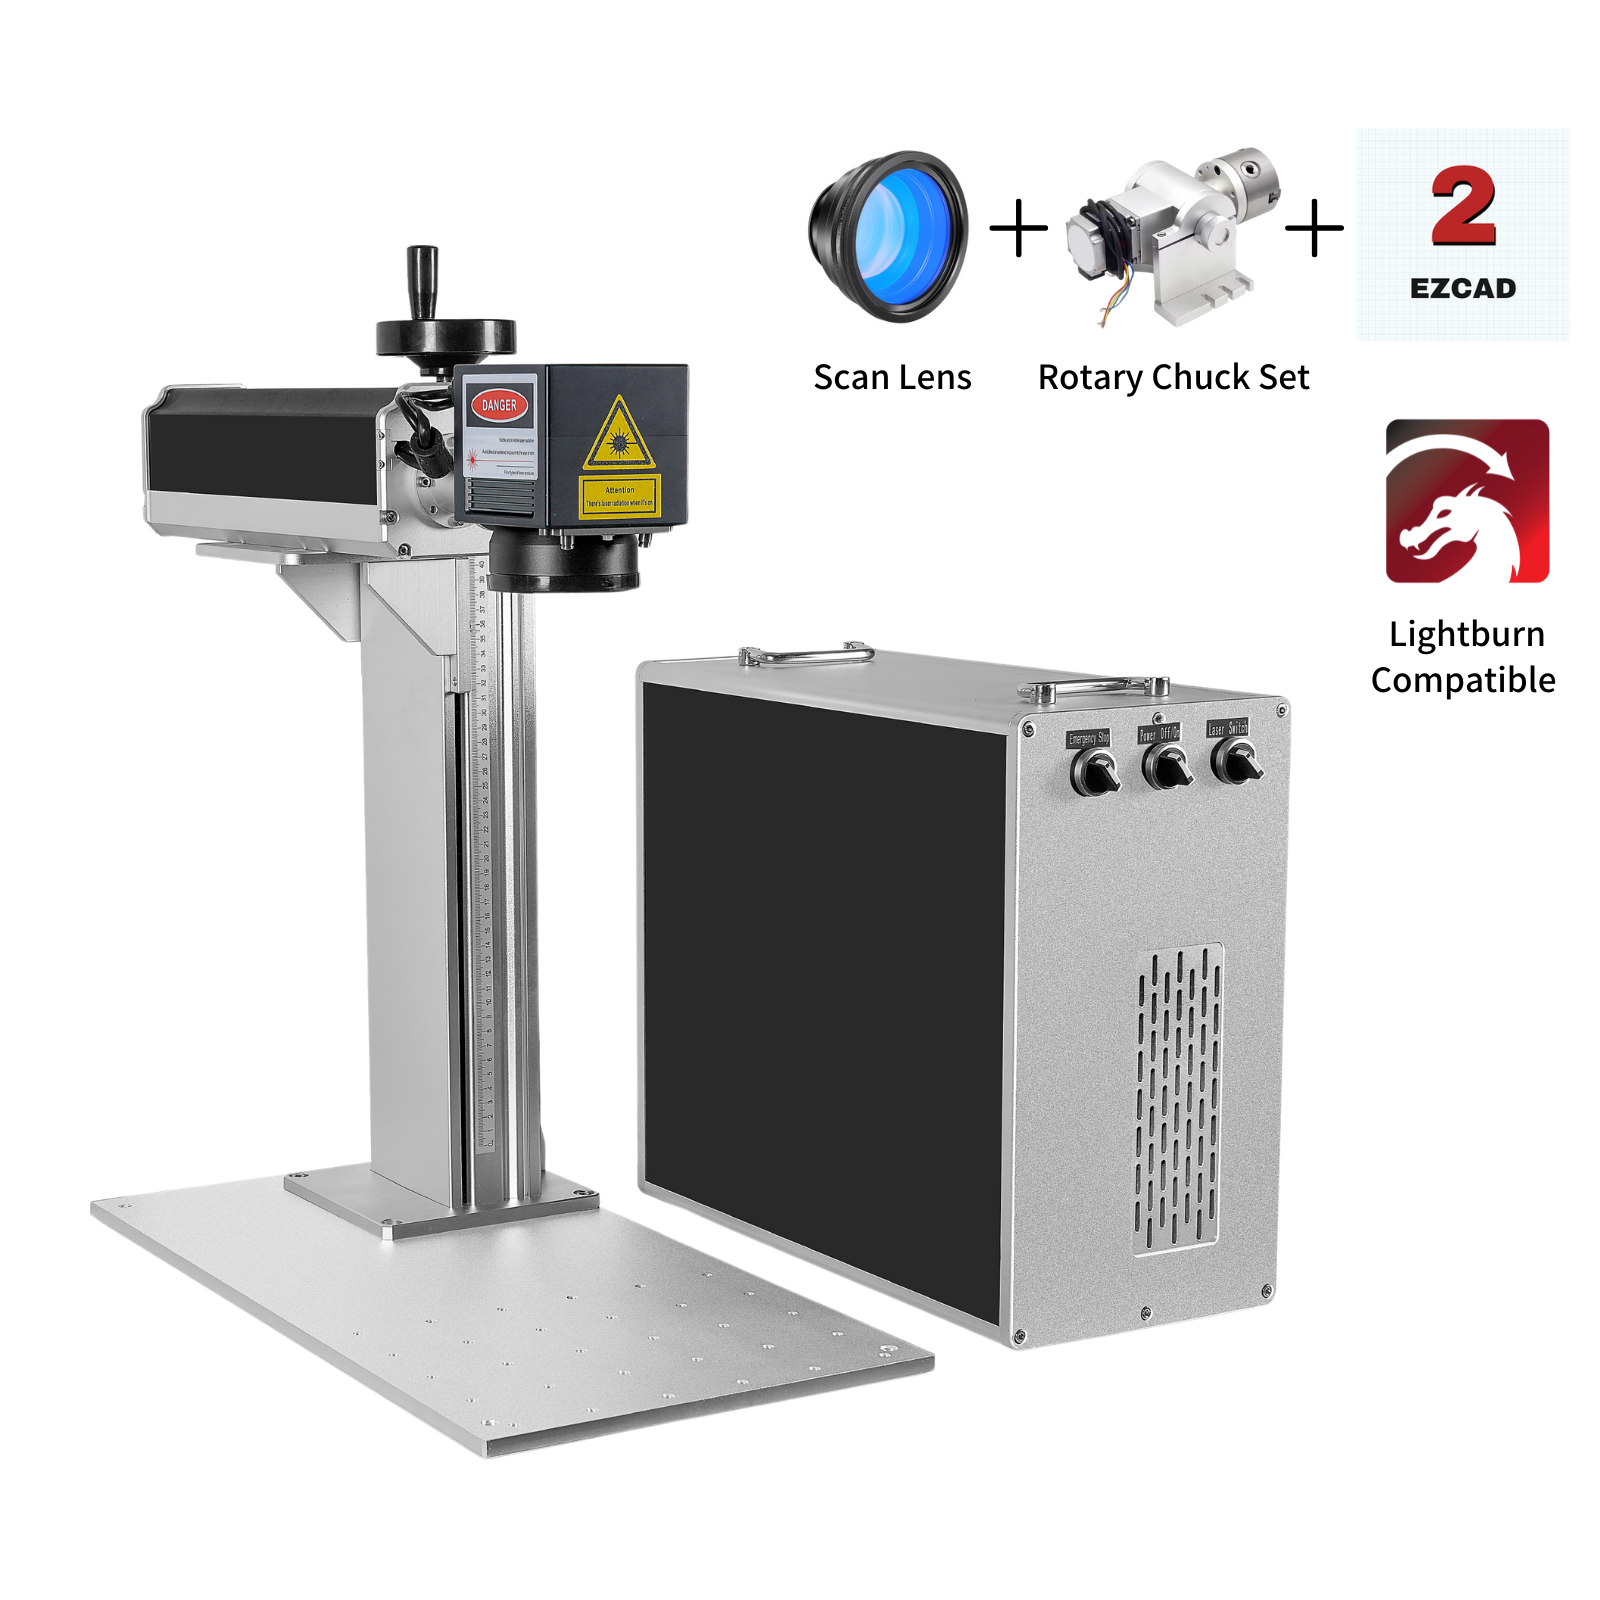 MCWlaser 50W JPT Split Type Fiber Laser Engraver Marking Machine With 8.7” X 8.7“  Working Area  and D80 Rotary For Metal Deep Engraving